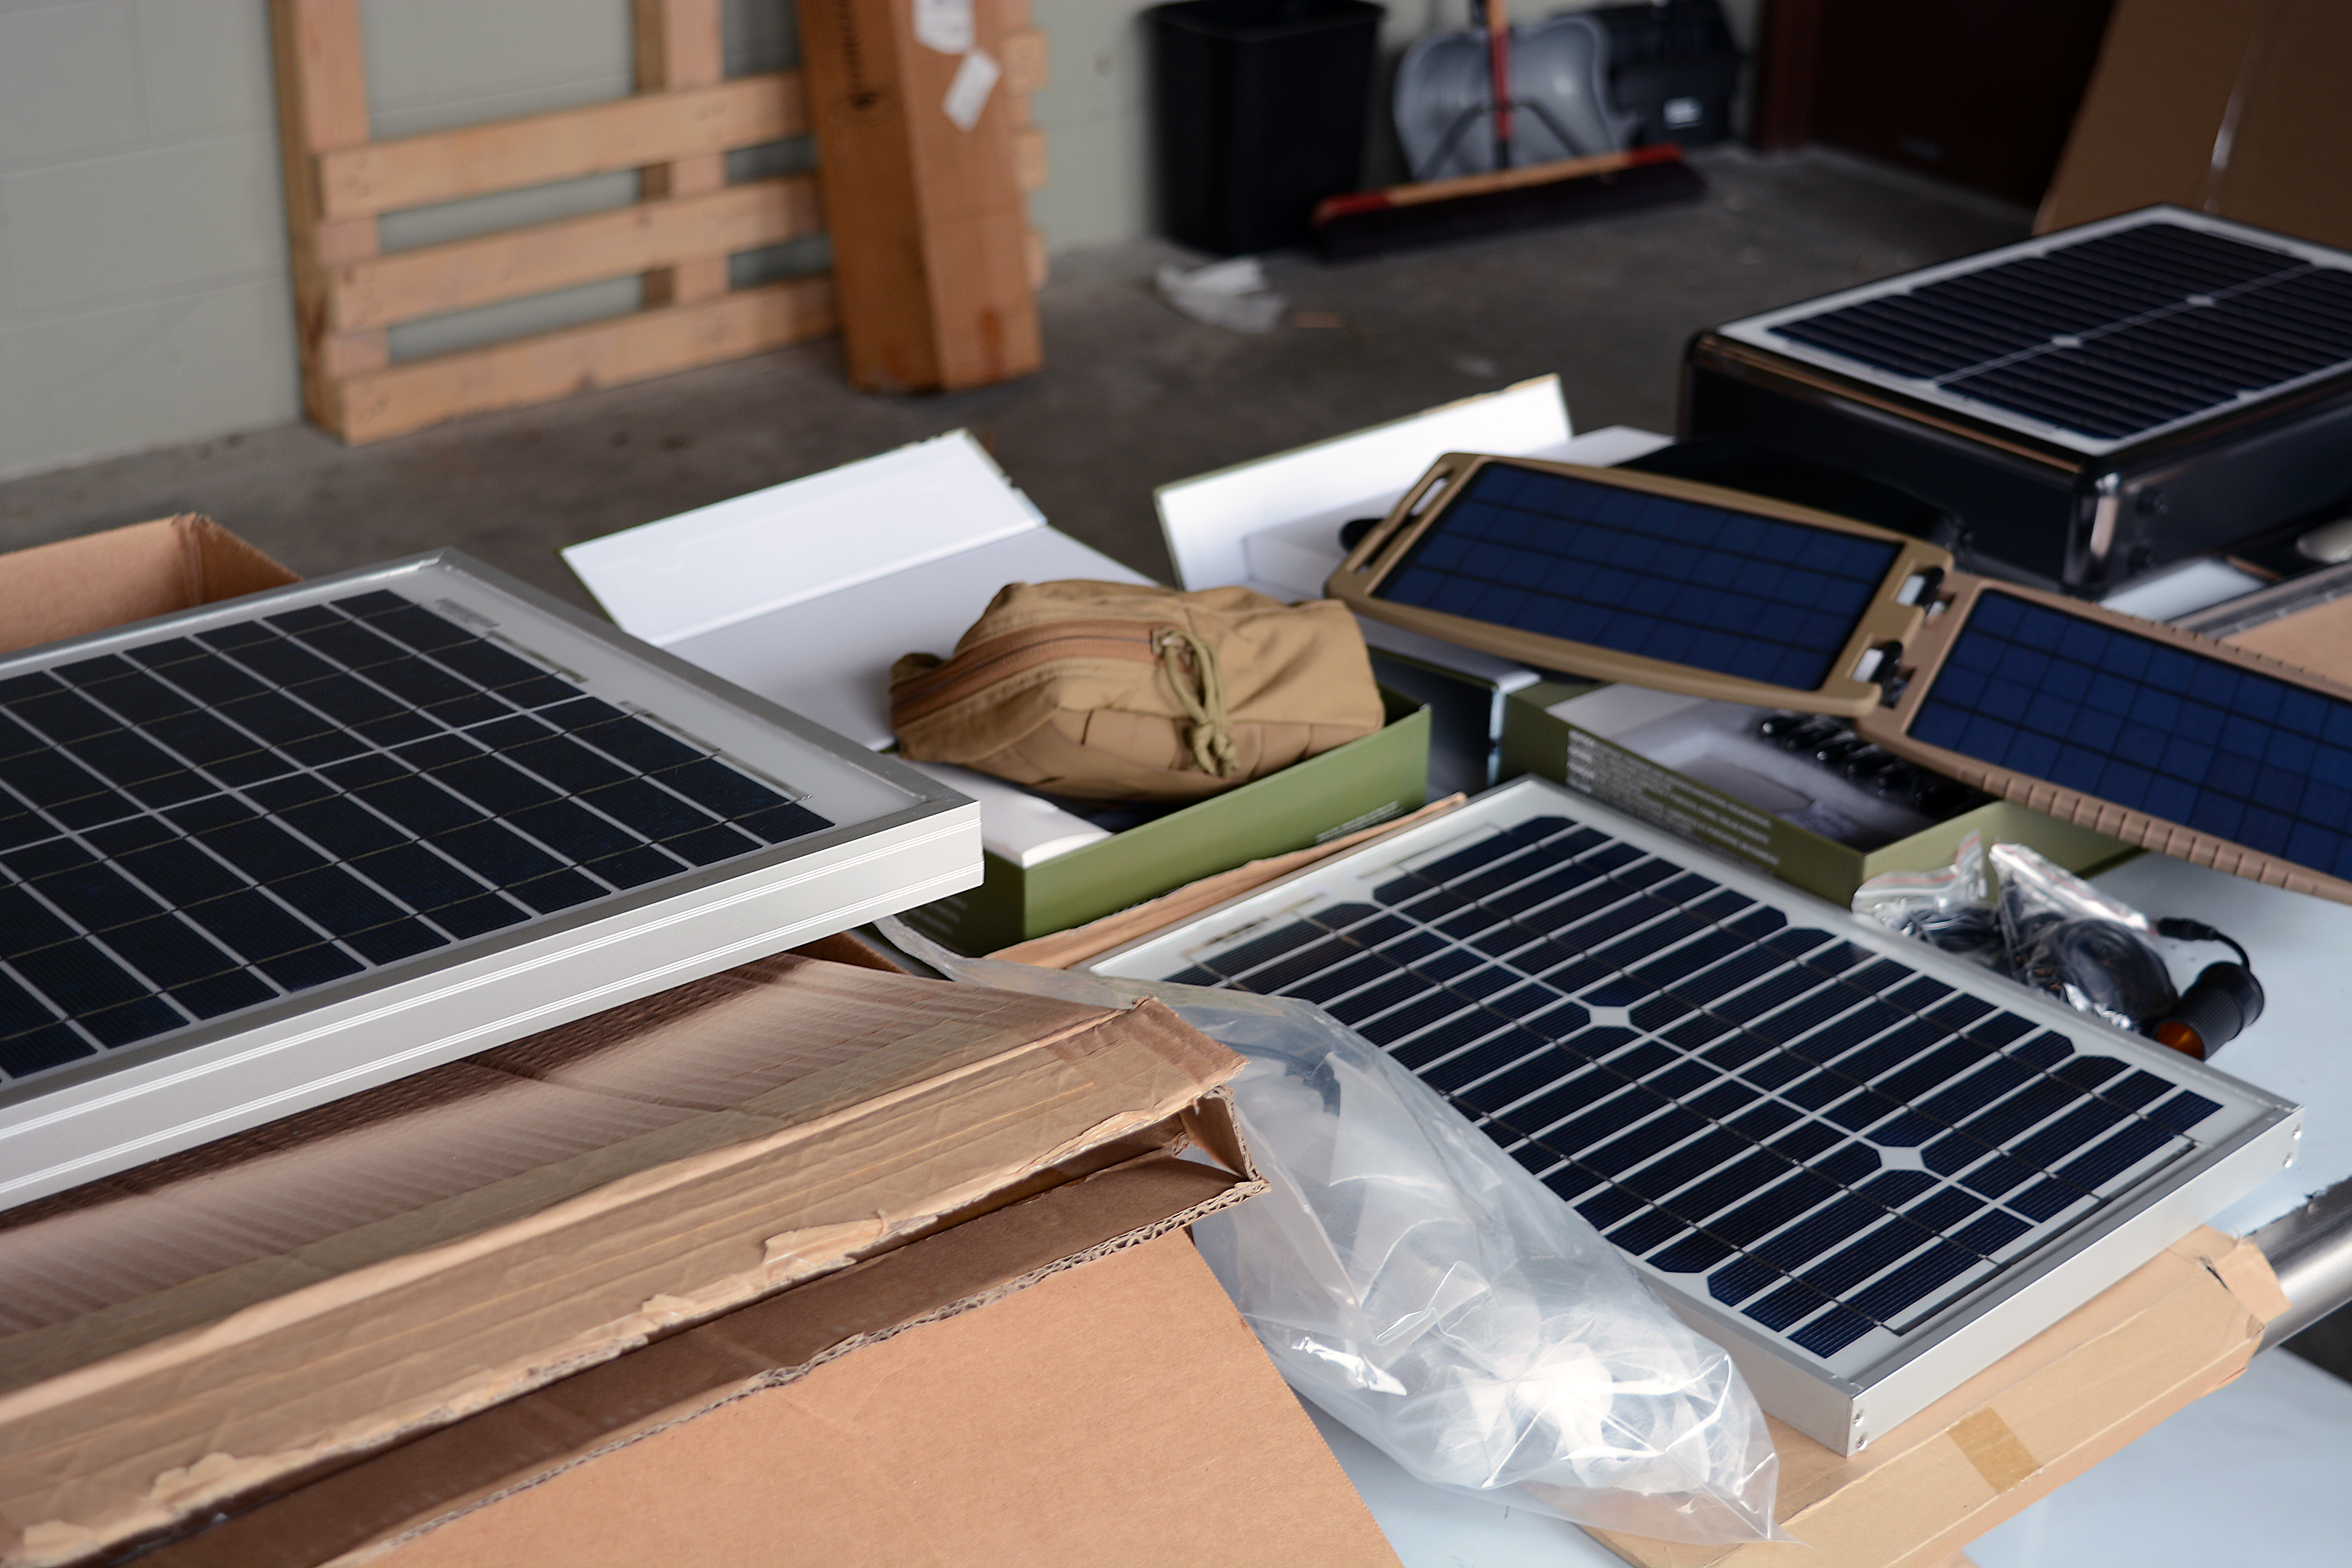  A collection of violative imported solar goods found during Operation Solar Flare requiring additional duties. Photo by Scott Sams